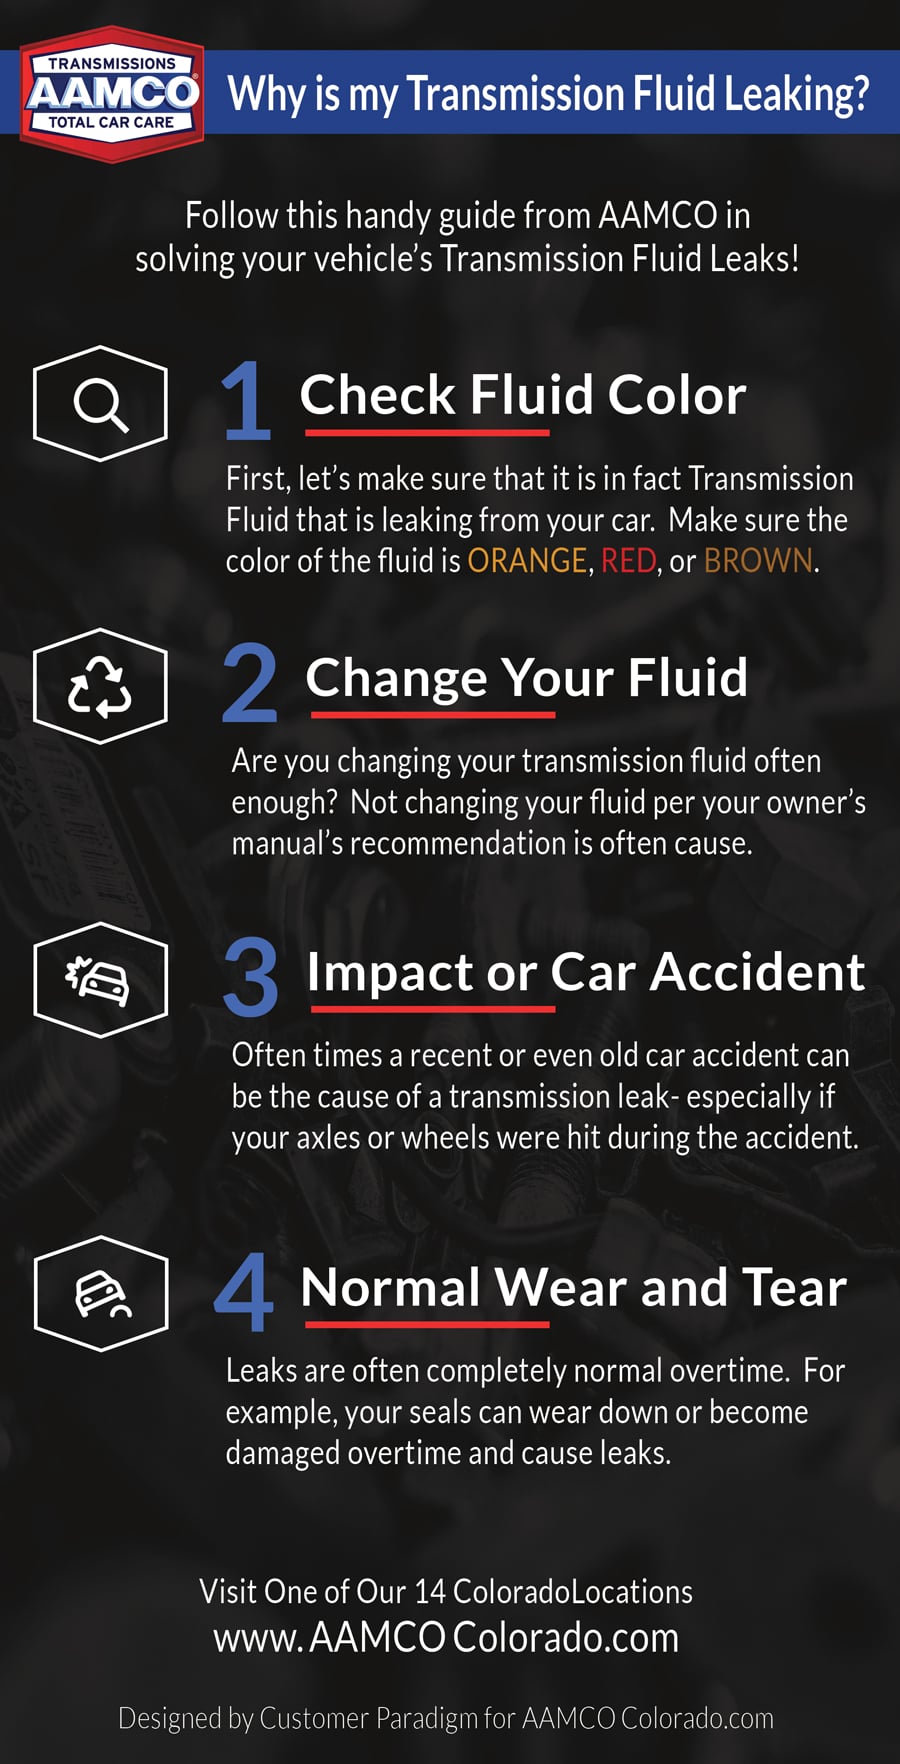 Why is my transmission fluid leaking infographic